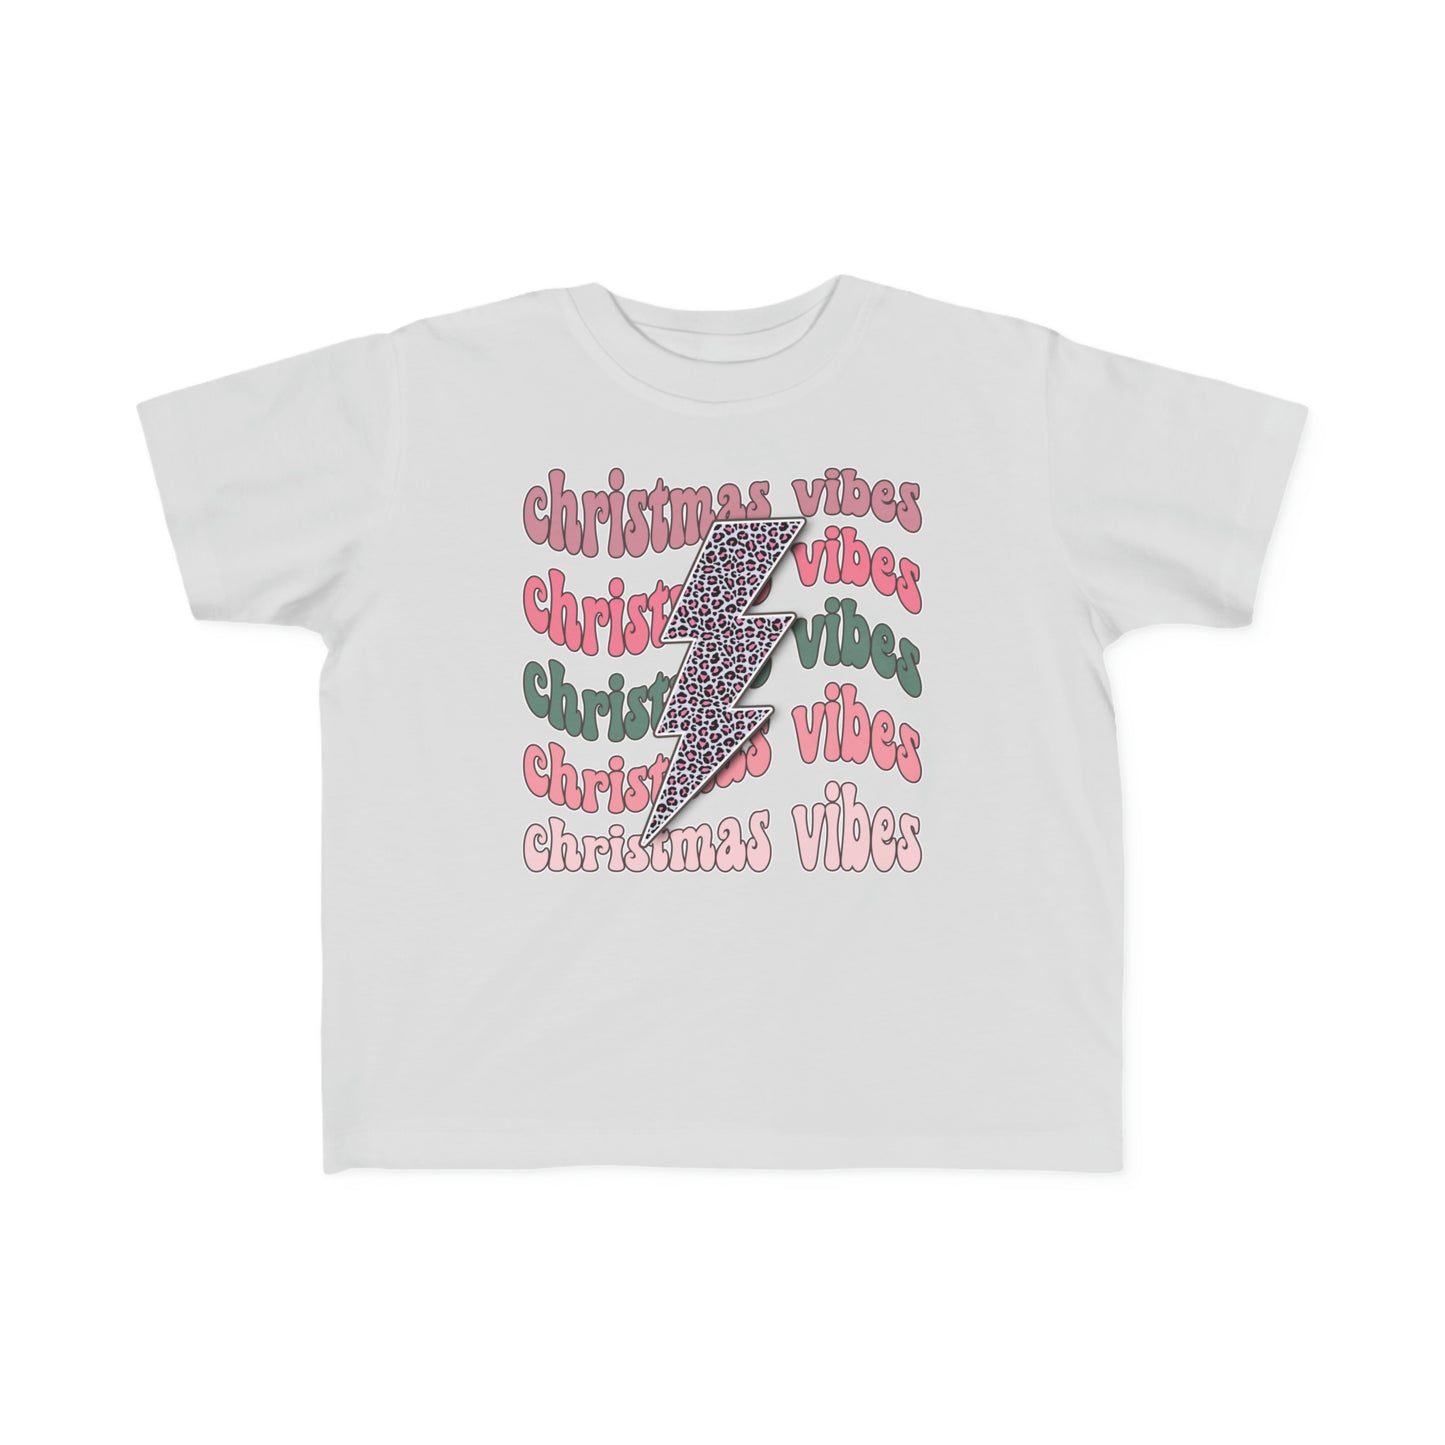 Retro Christmas Vibes Toddler's Fine Jersey Tee